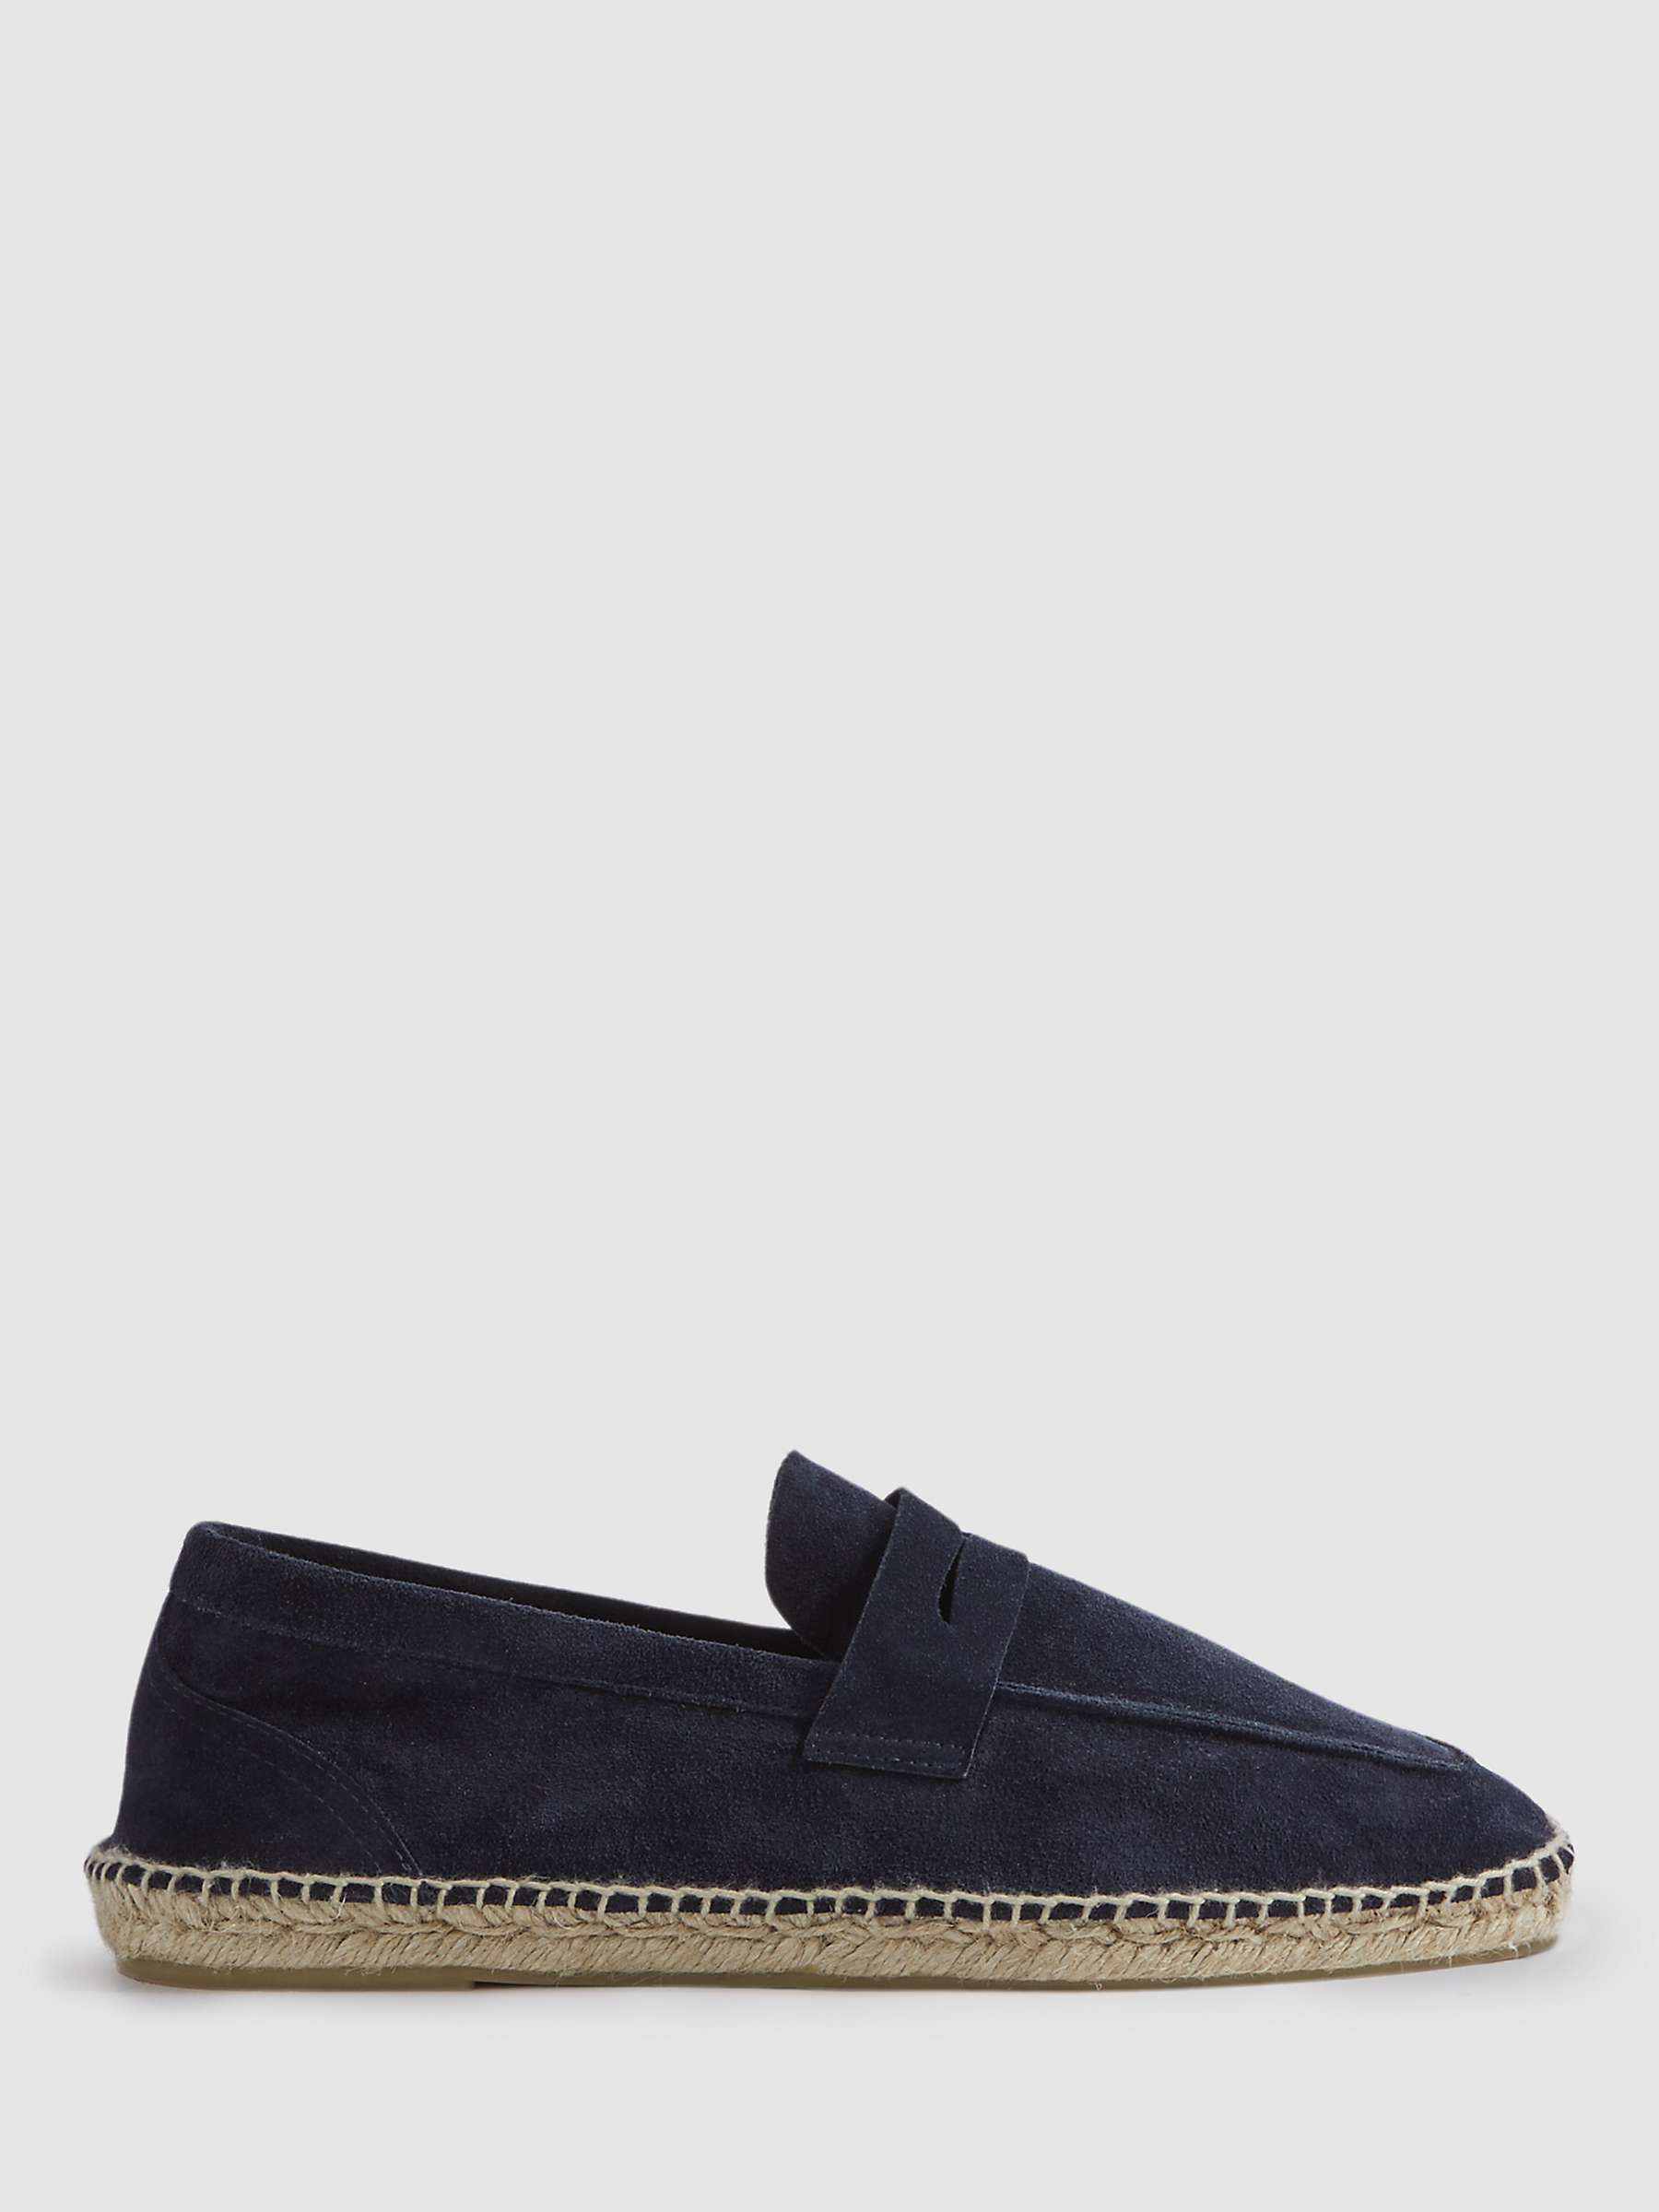 Buy Reiss Cannes Suede Espadrille Online at johnlewis.com